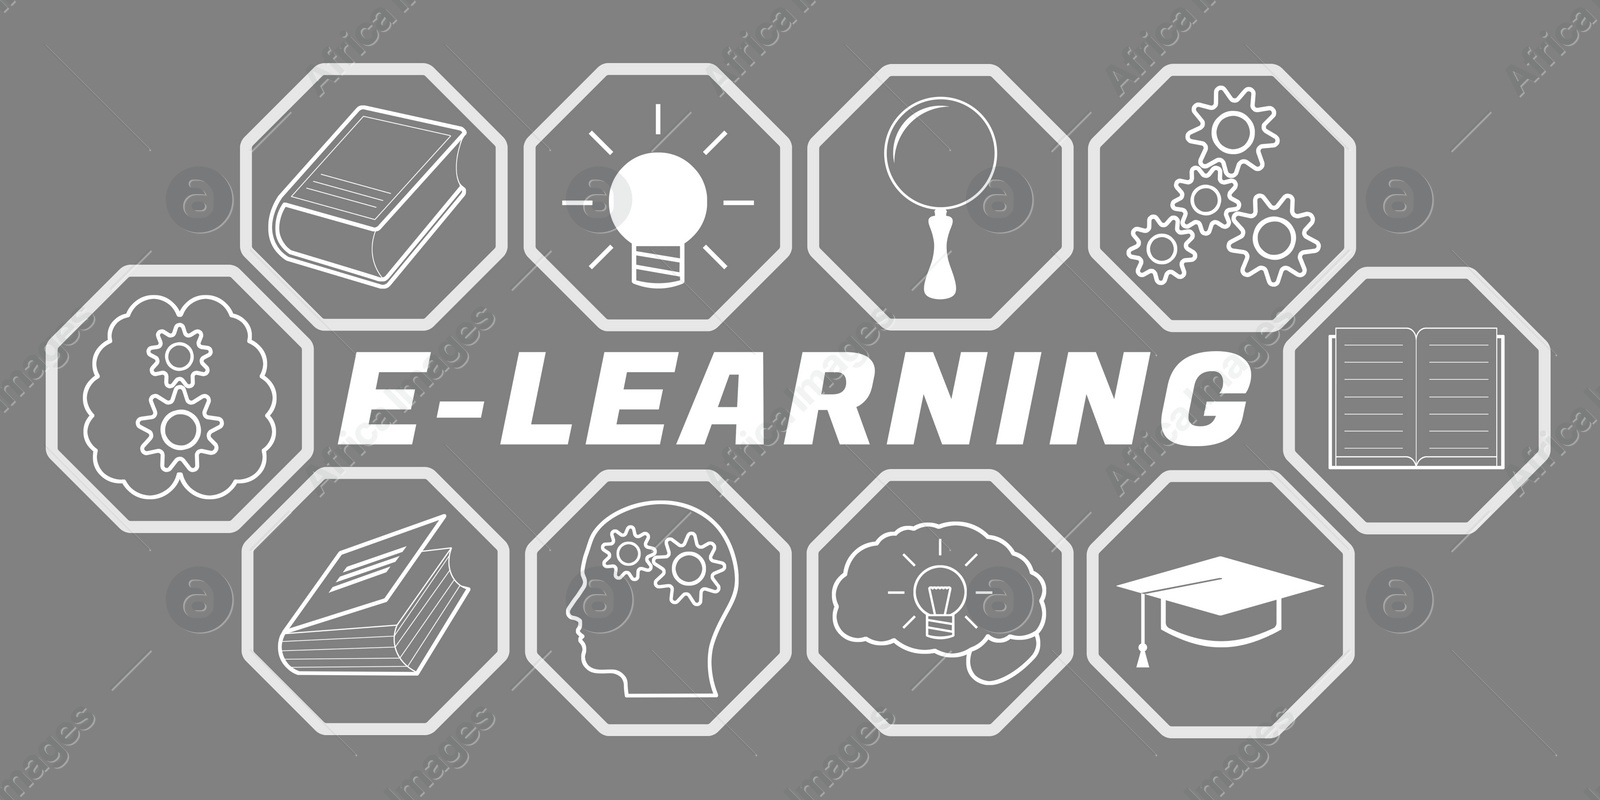 Image of E-learning. Word and icons on grey background, banner design